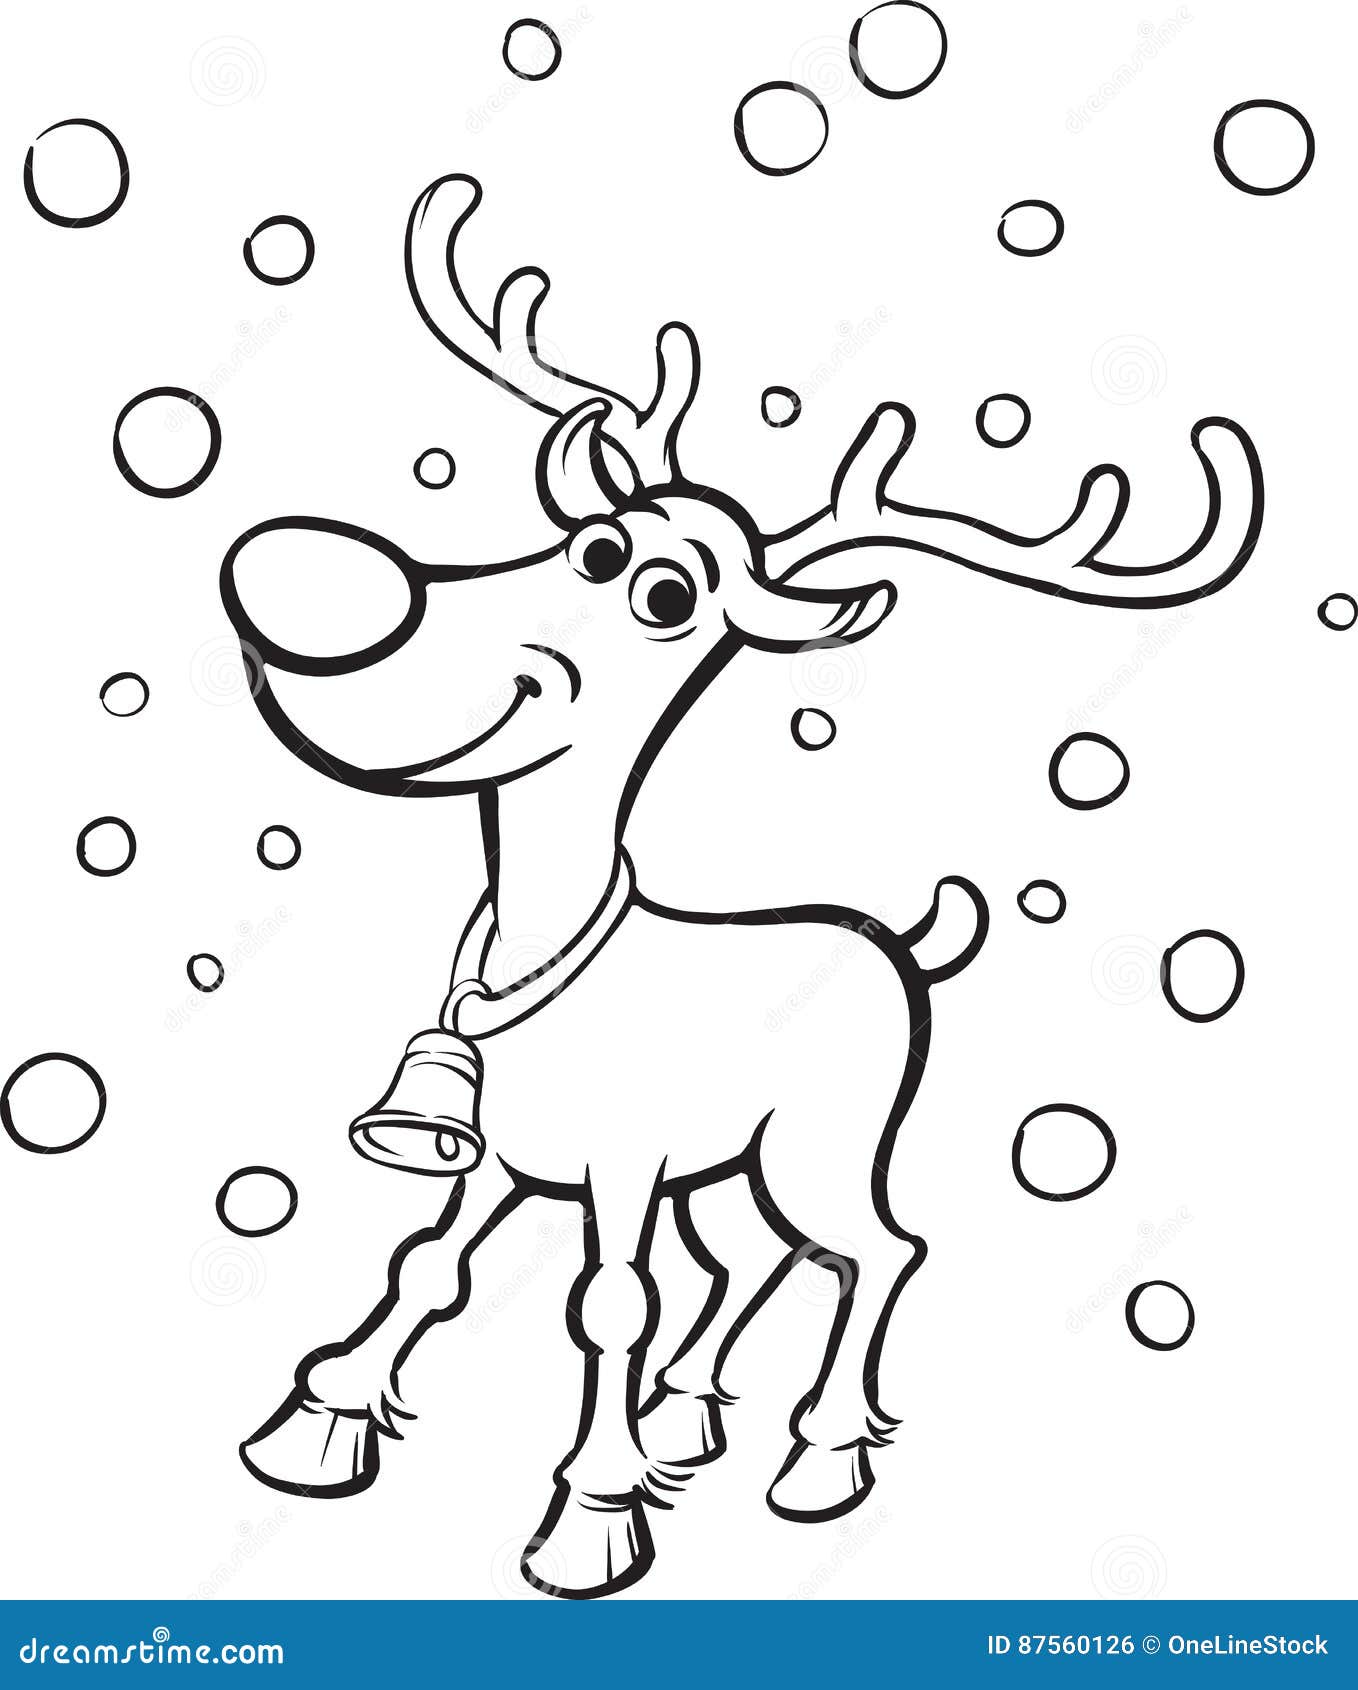 Coloring book rudolph the red